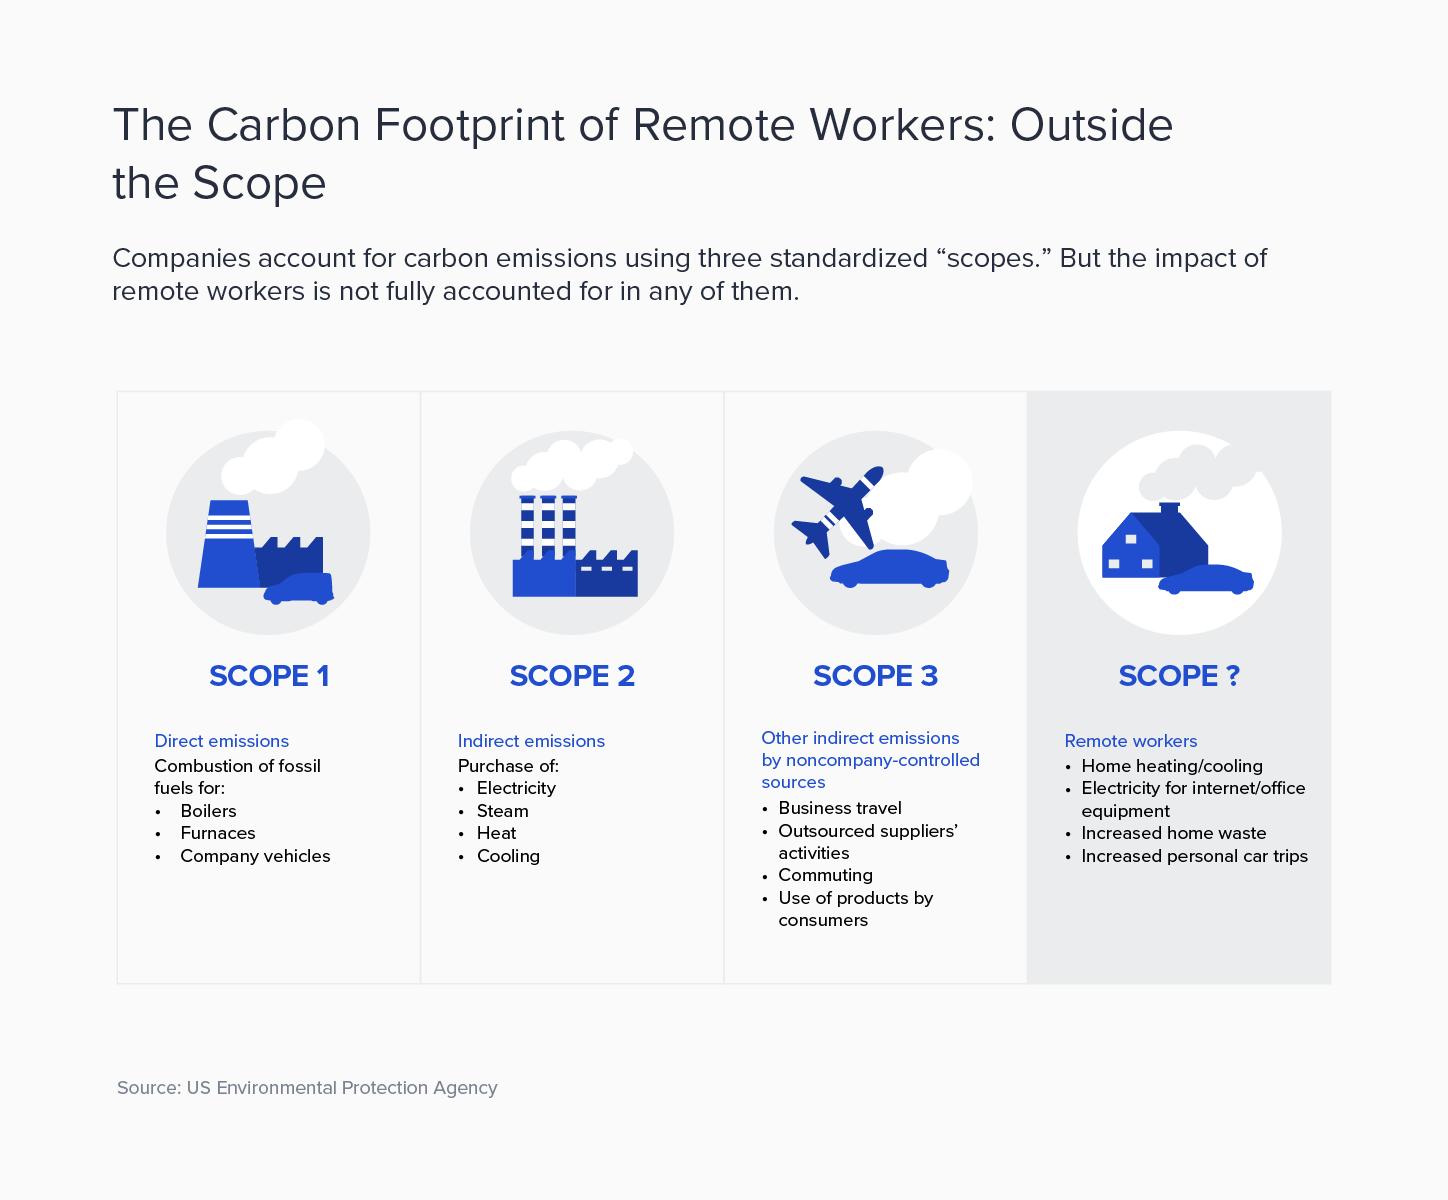 Hcl Work From Home 2021: Reducing HCL's Carbon Footprint Through Remote Work